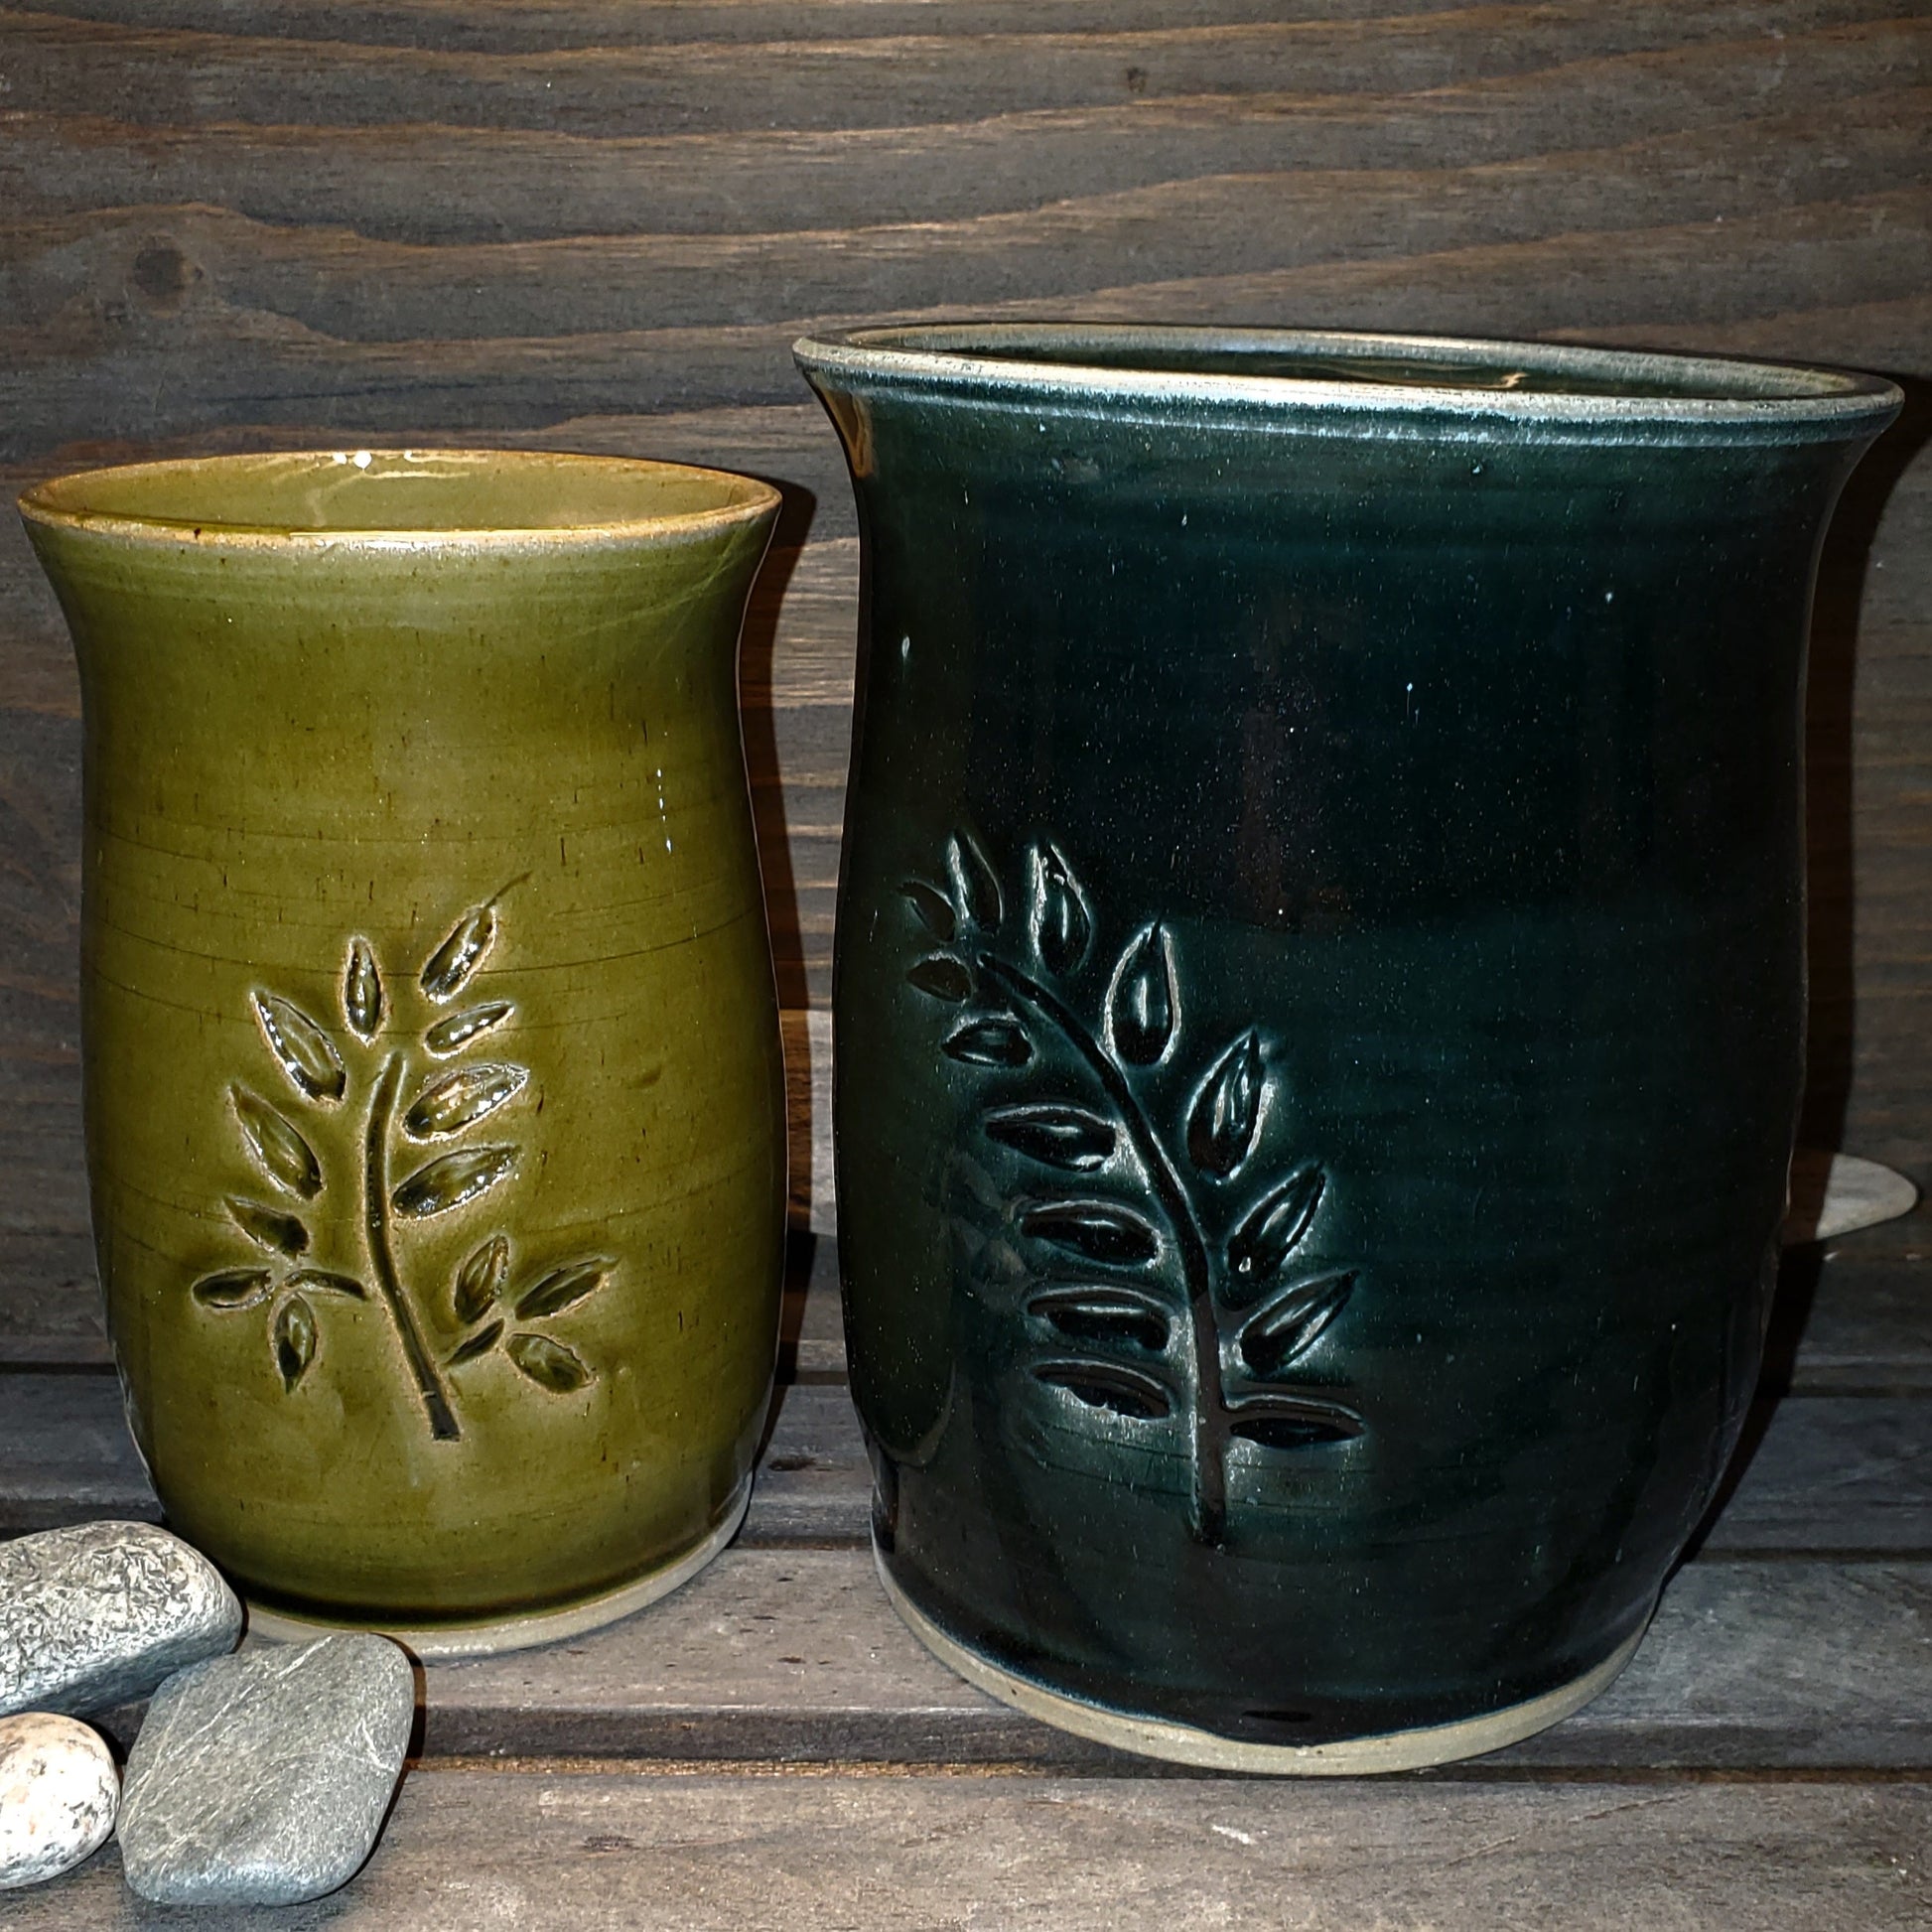 Flower Vase with Carved Leaves: smaller version - Green Cabin Pottery